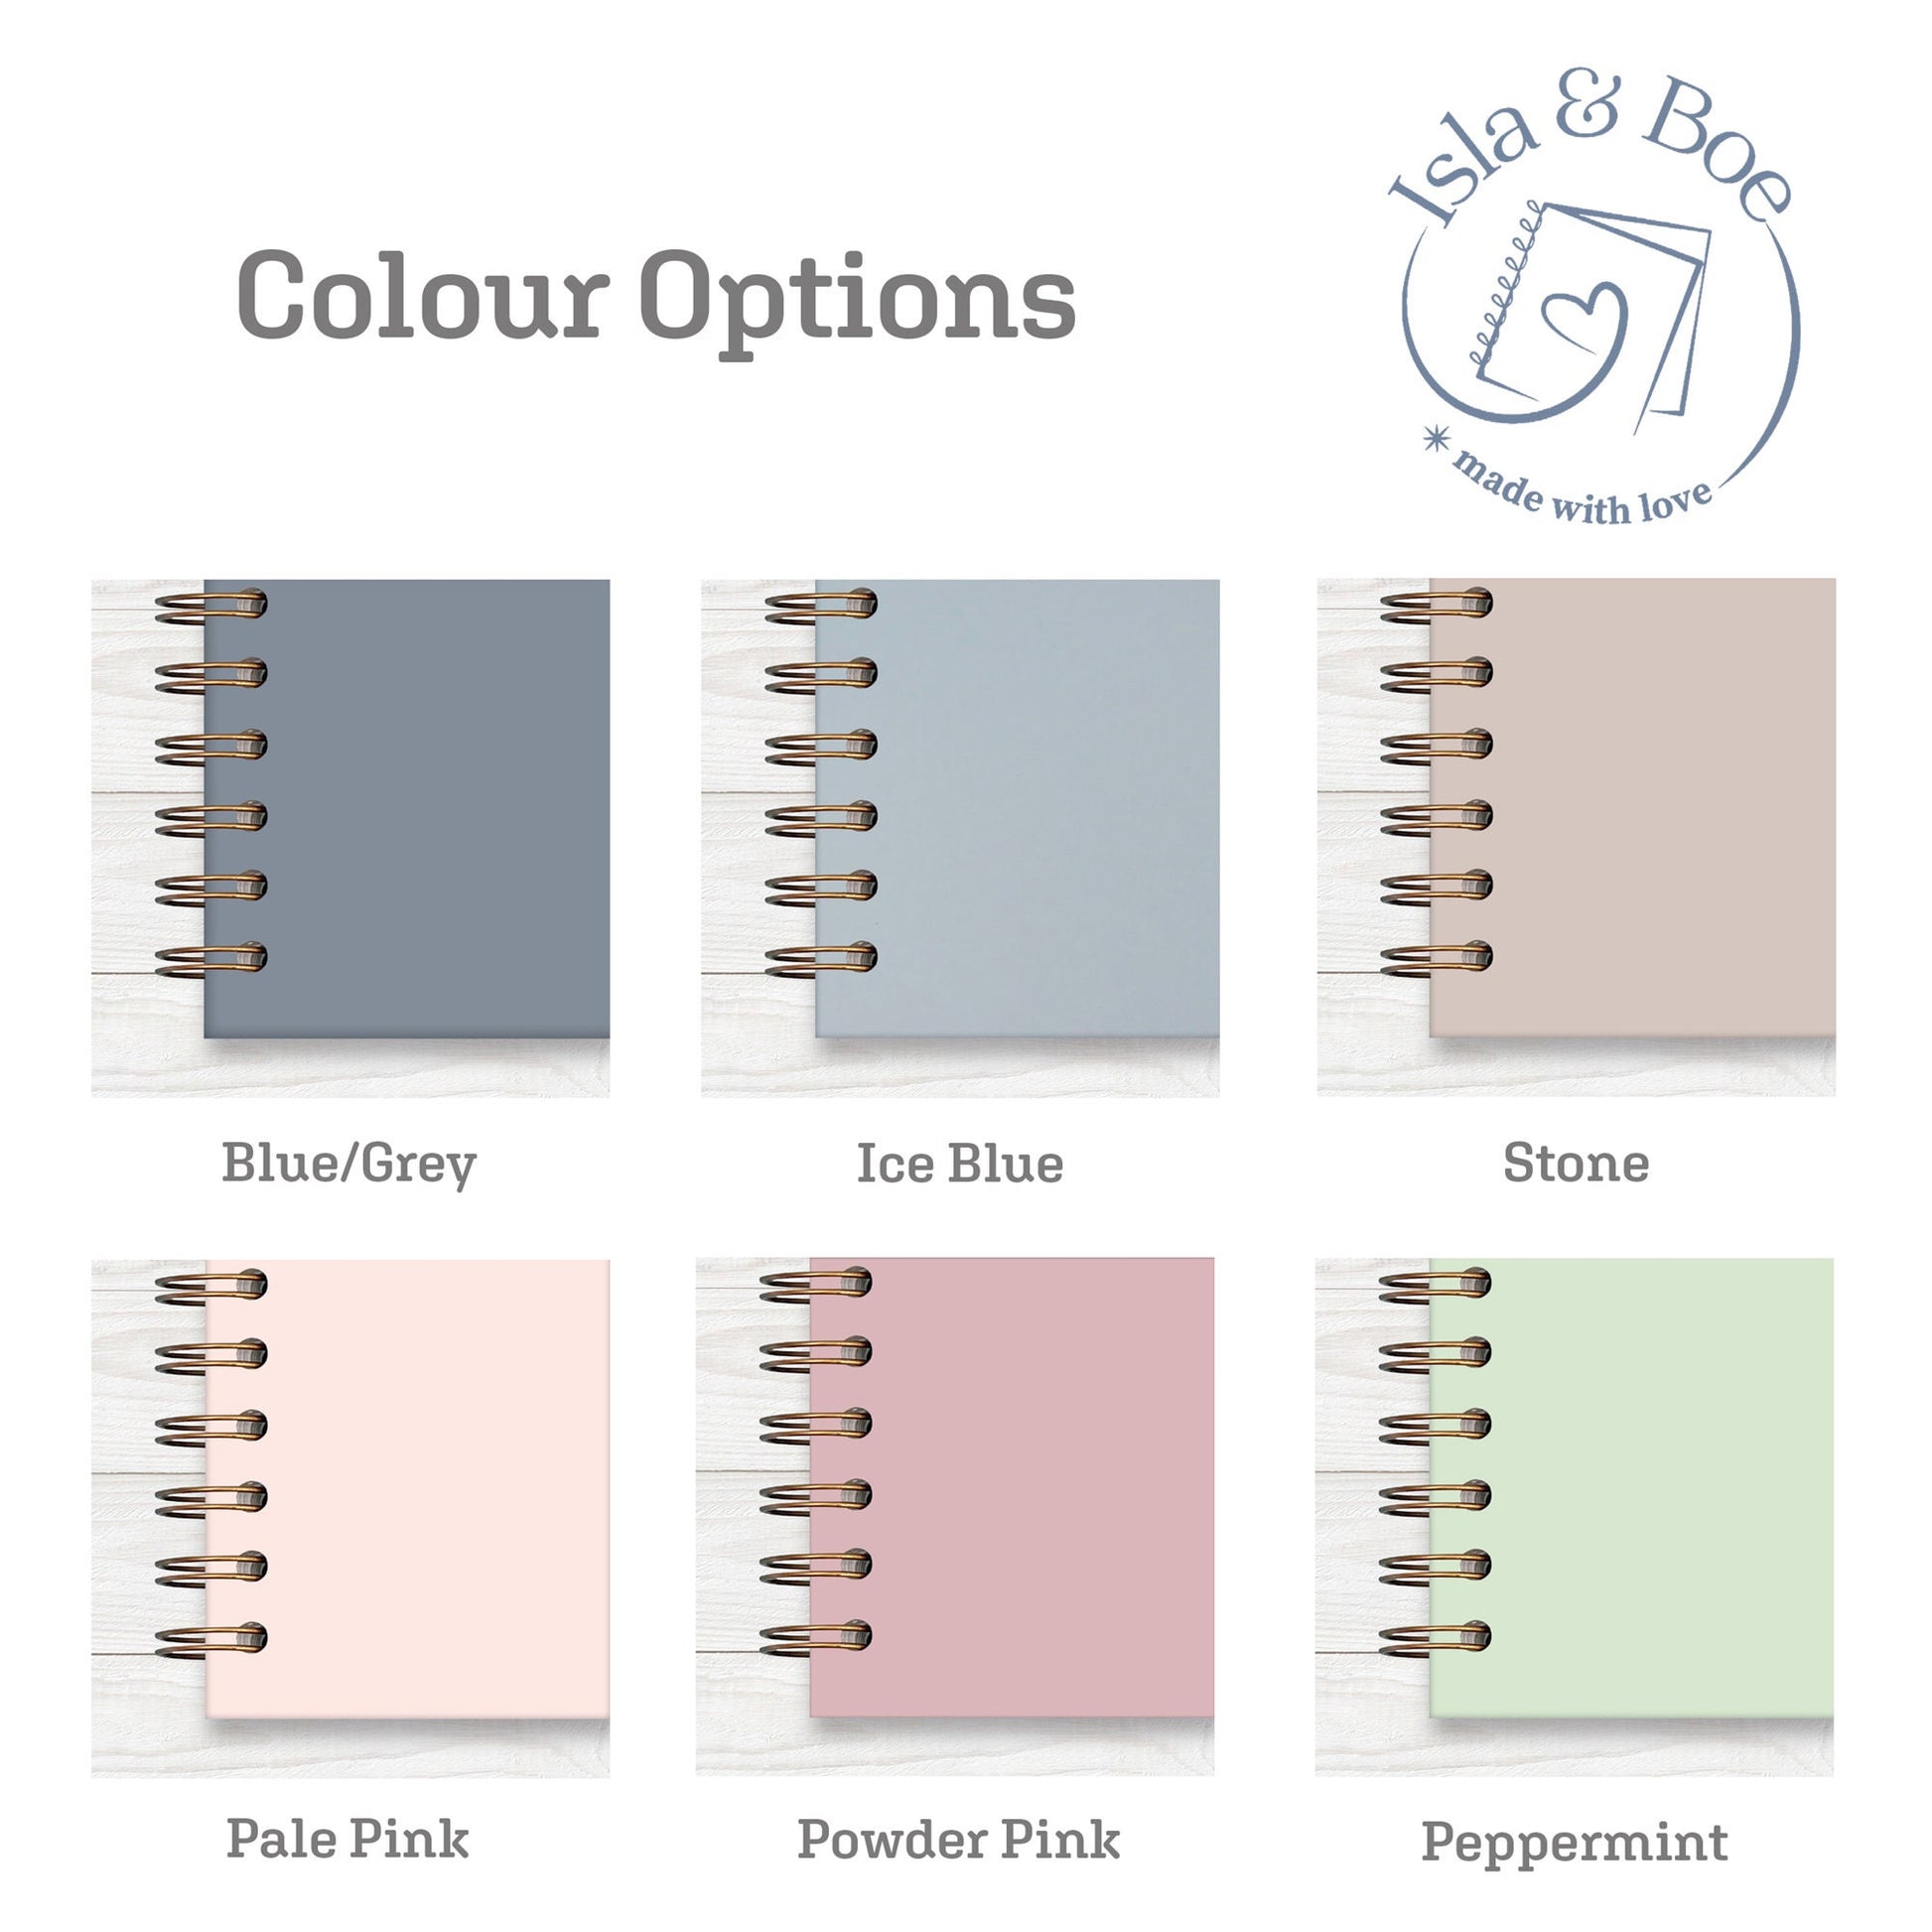 Colour swatch options for memory book covers. Blue/Grey, Ice blue, Stone, Pale Pink, Powder Pink and Peppermint